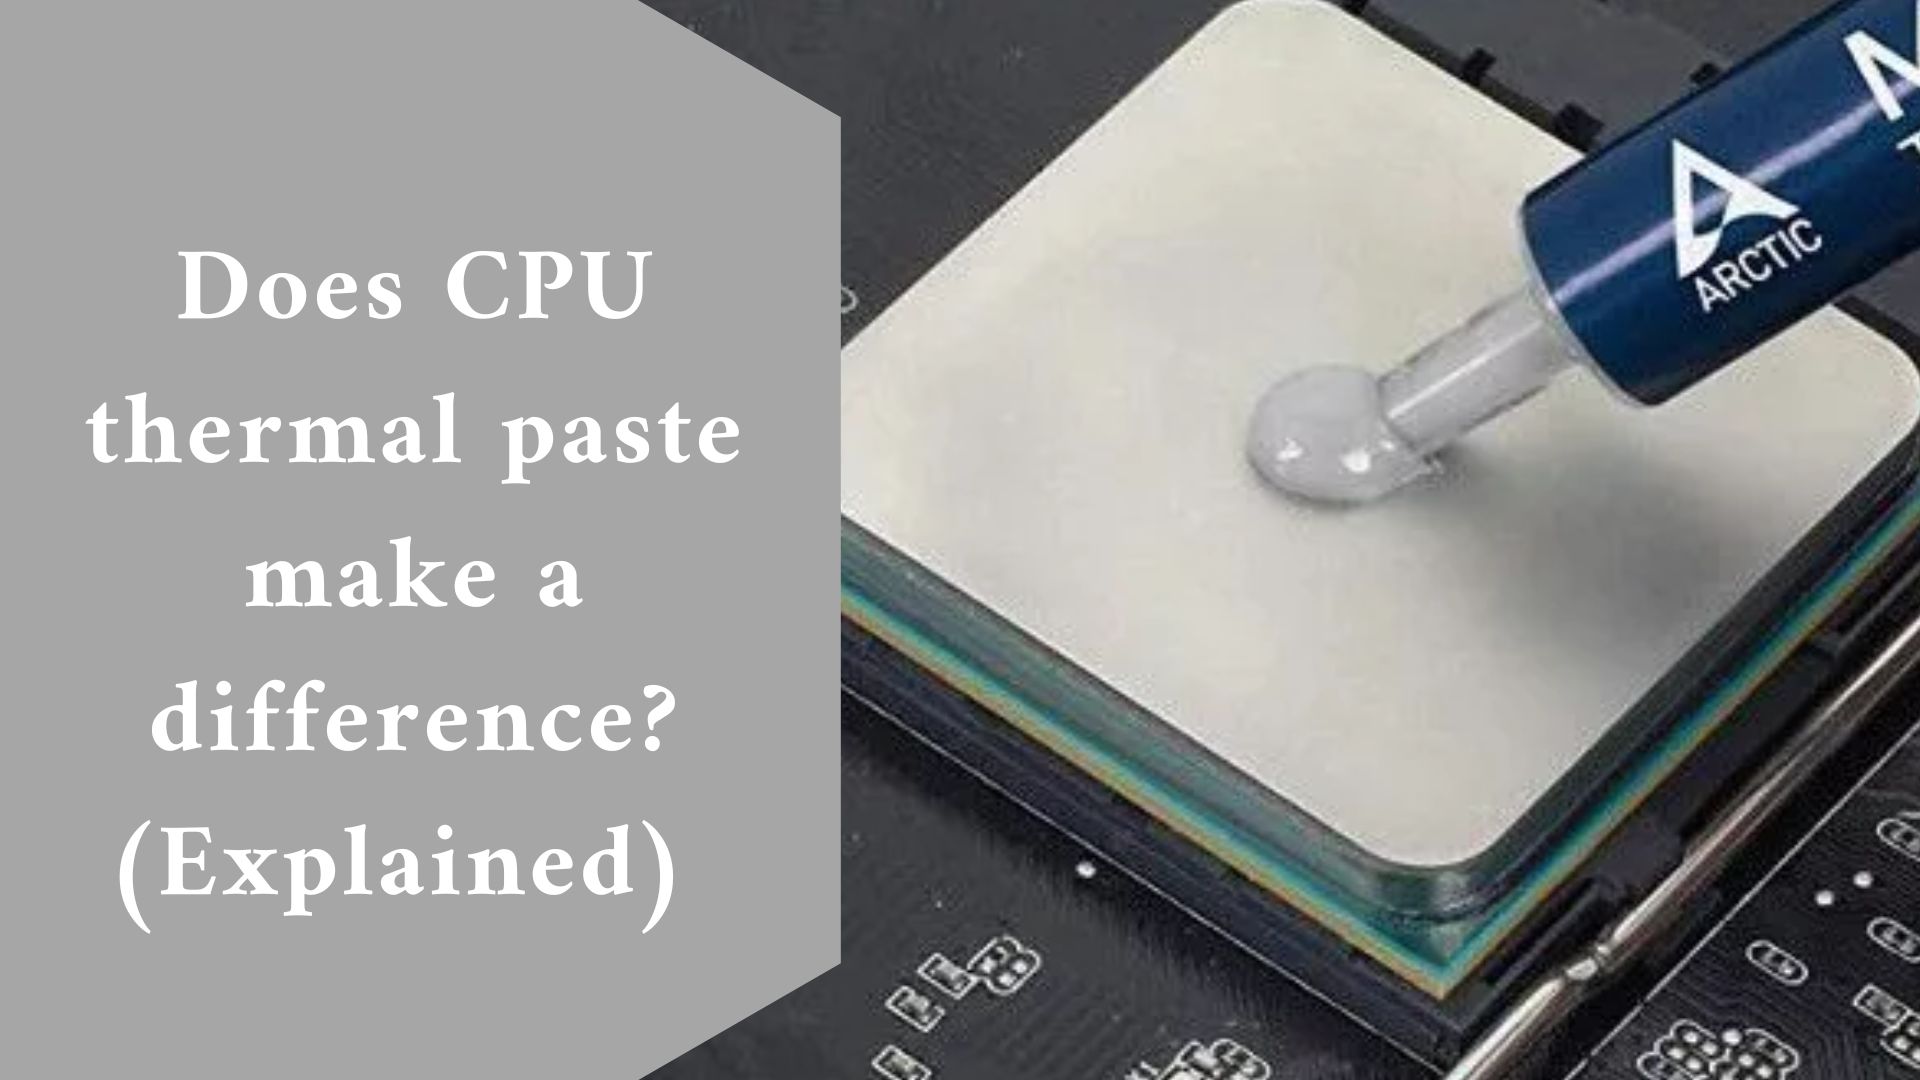 Does CPU thermal paste make a difference? (Explained)